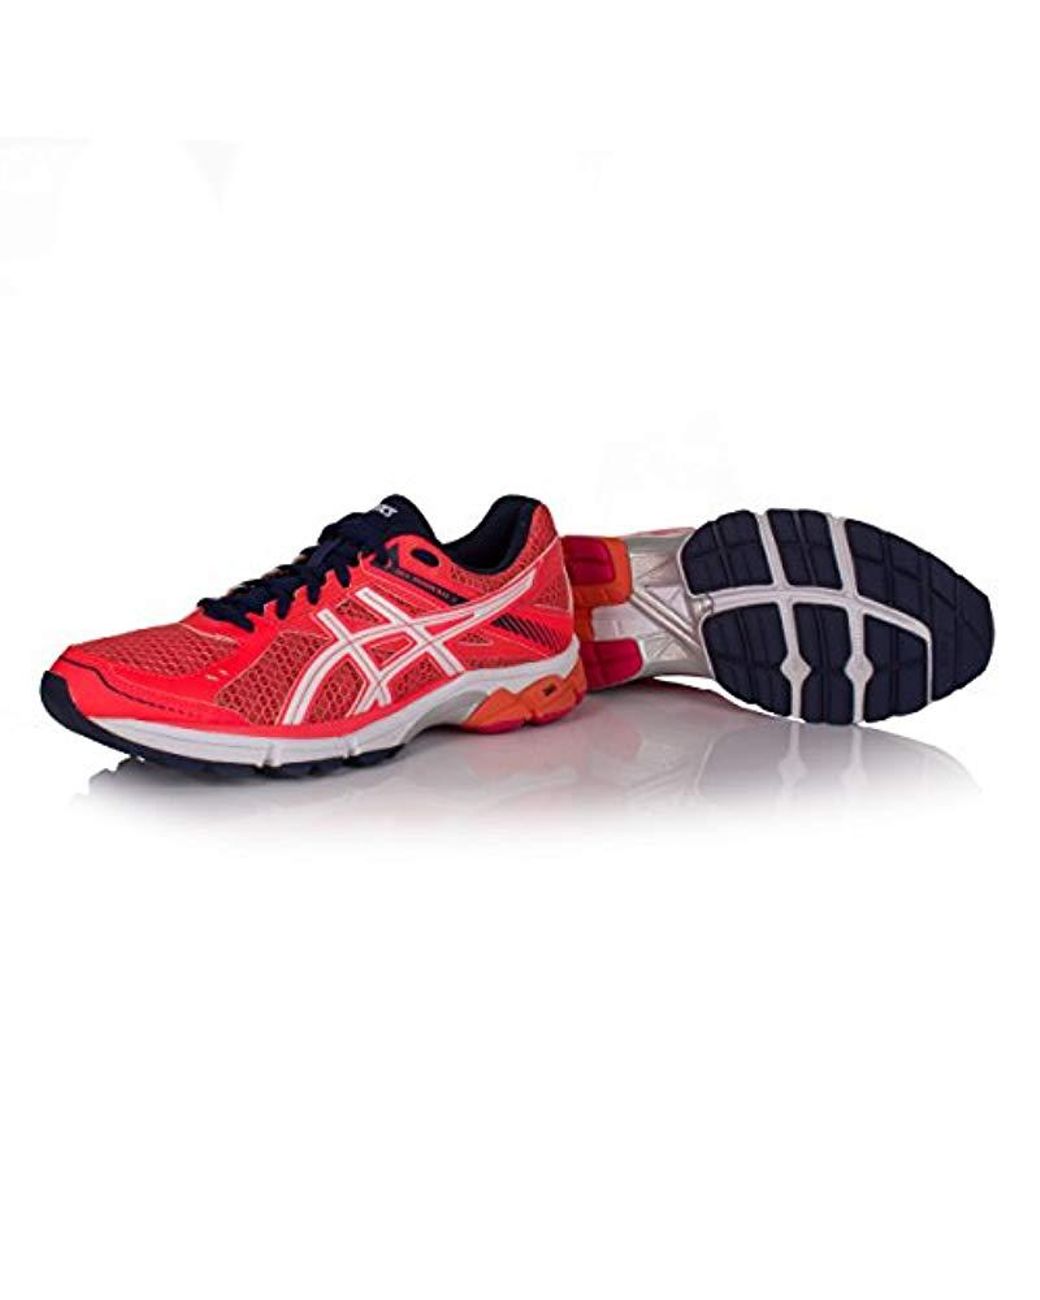 Asics Gel Innovate 7 Running Shoes in Pink | Lyst UK